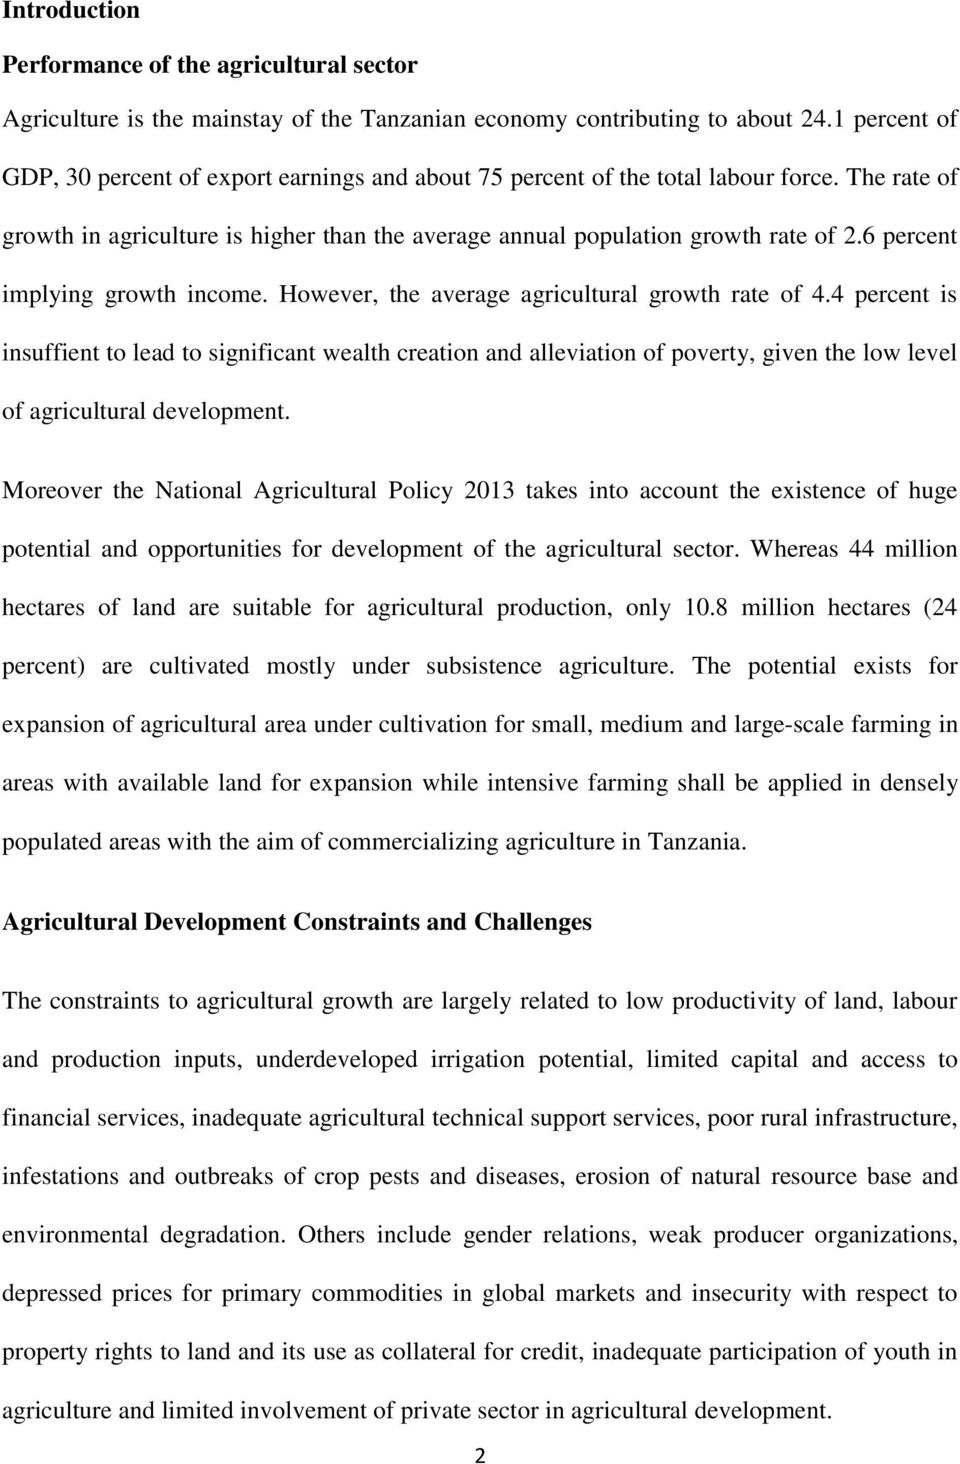 6 percent implying growth income. However, the average agricultural growth rate of 4.